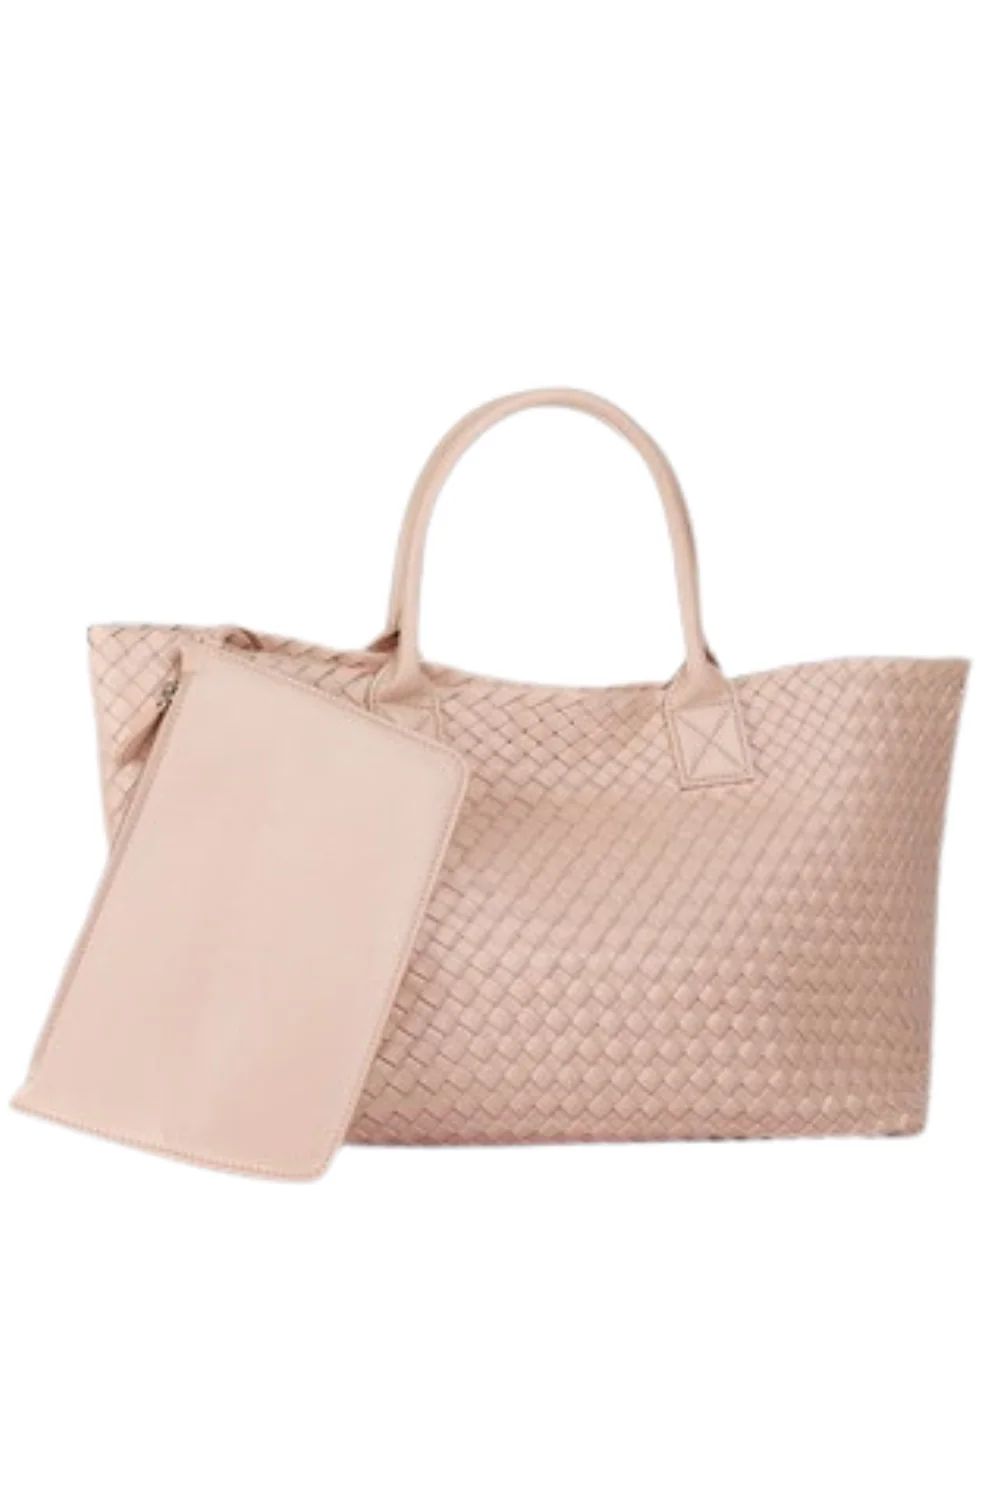 'Fernanda' Large Woven Faux Leather Tote Bag (7 Colors) | Goodnight Macaroon